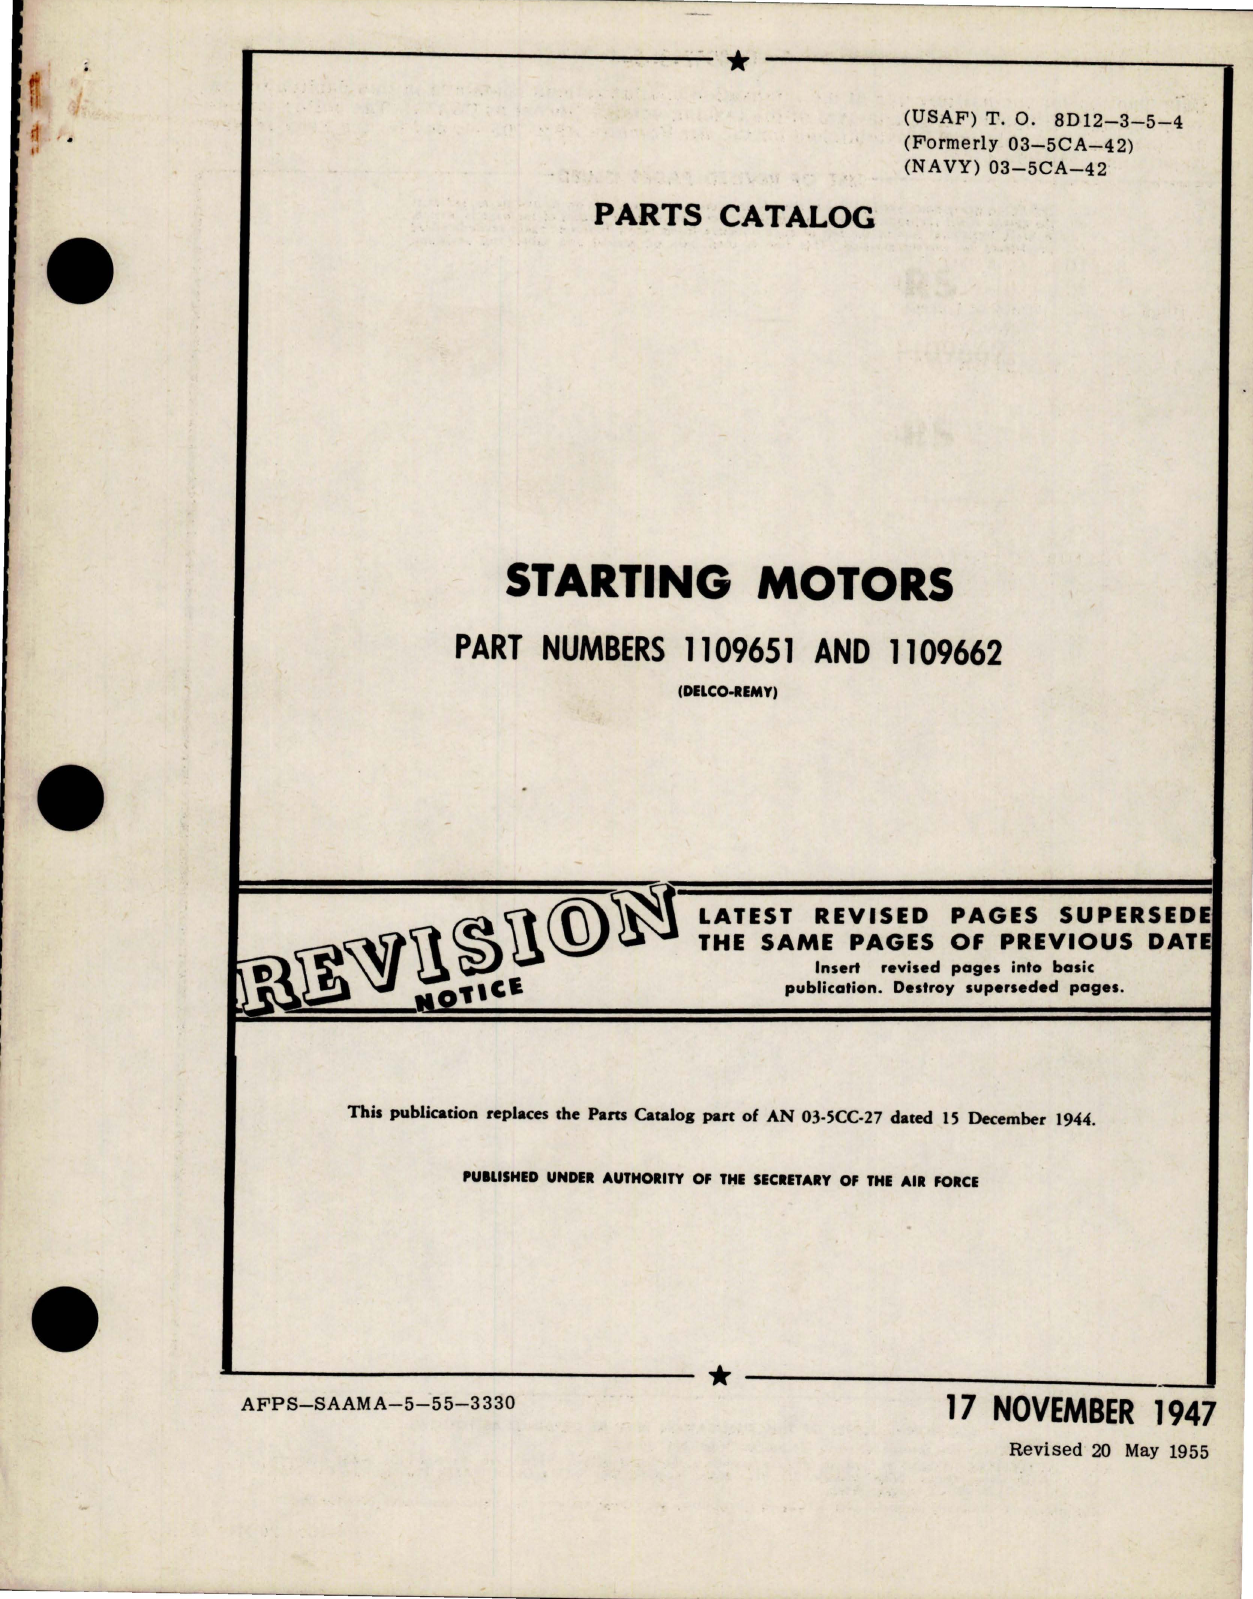 Sample page 1 from AirCorps Library document: Parts Catalog for Starting Motors - Parts 1109651 and 1109662 